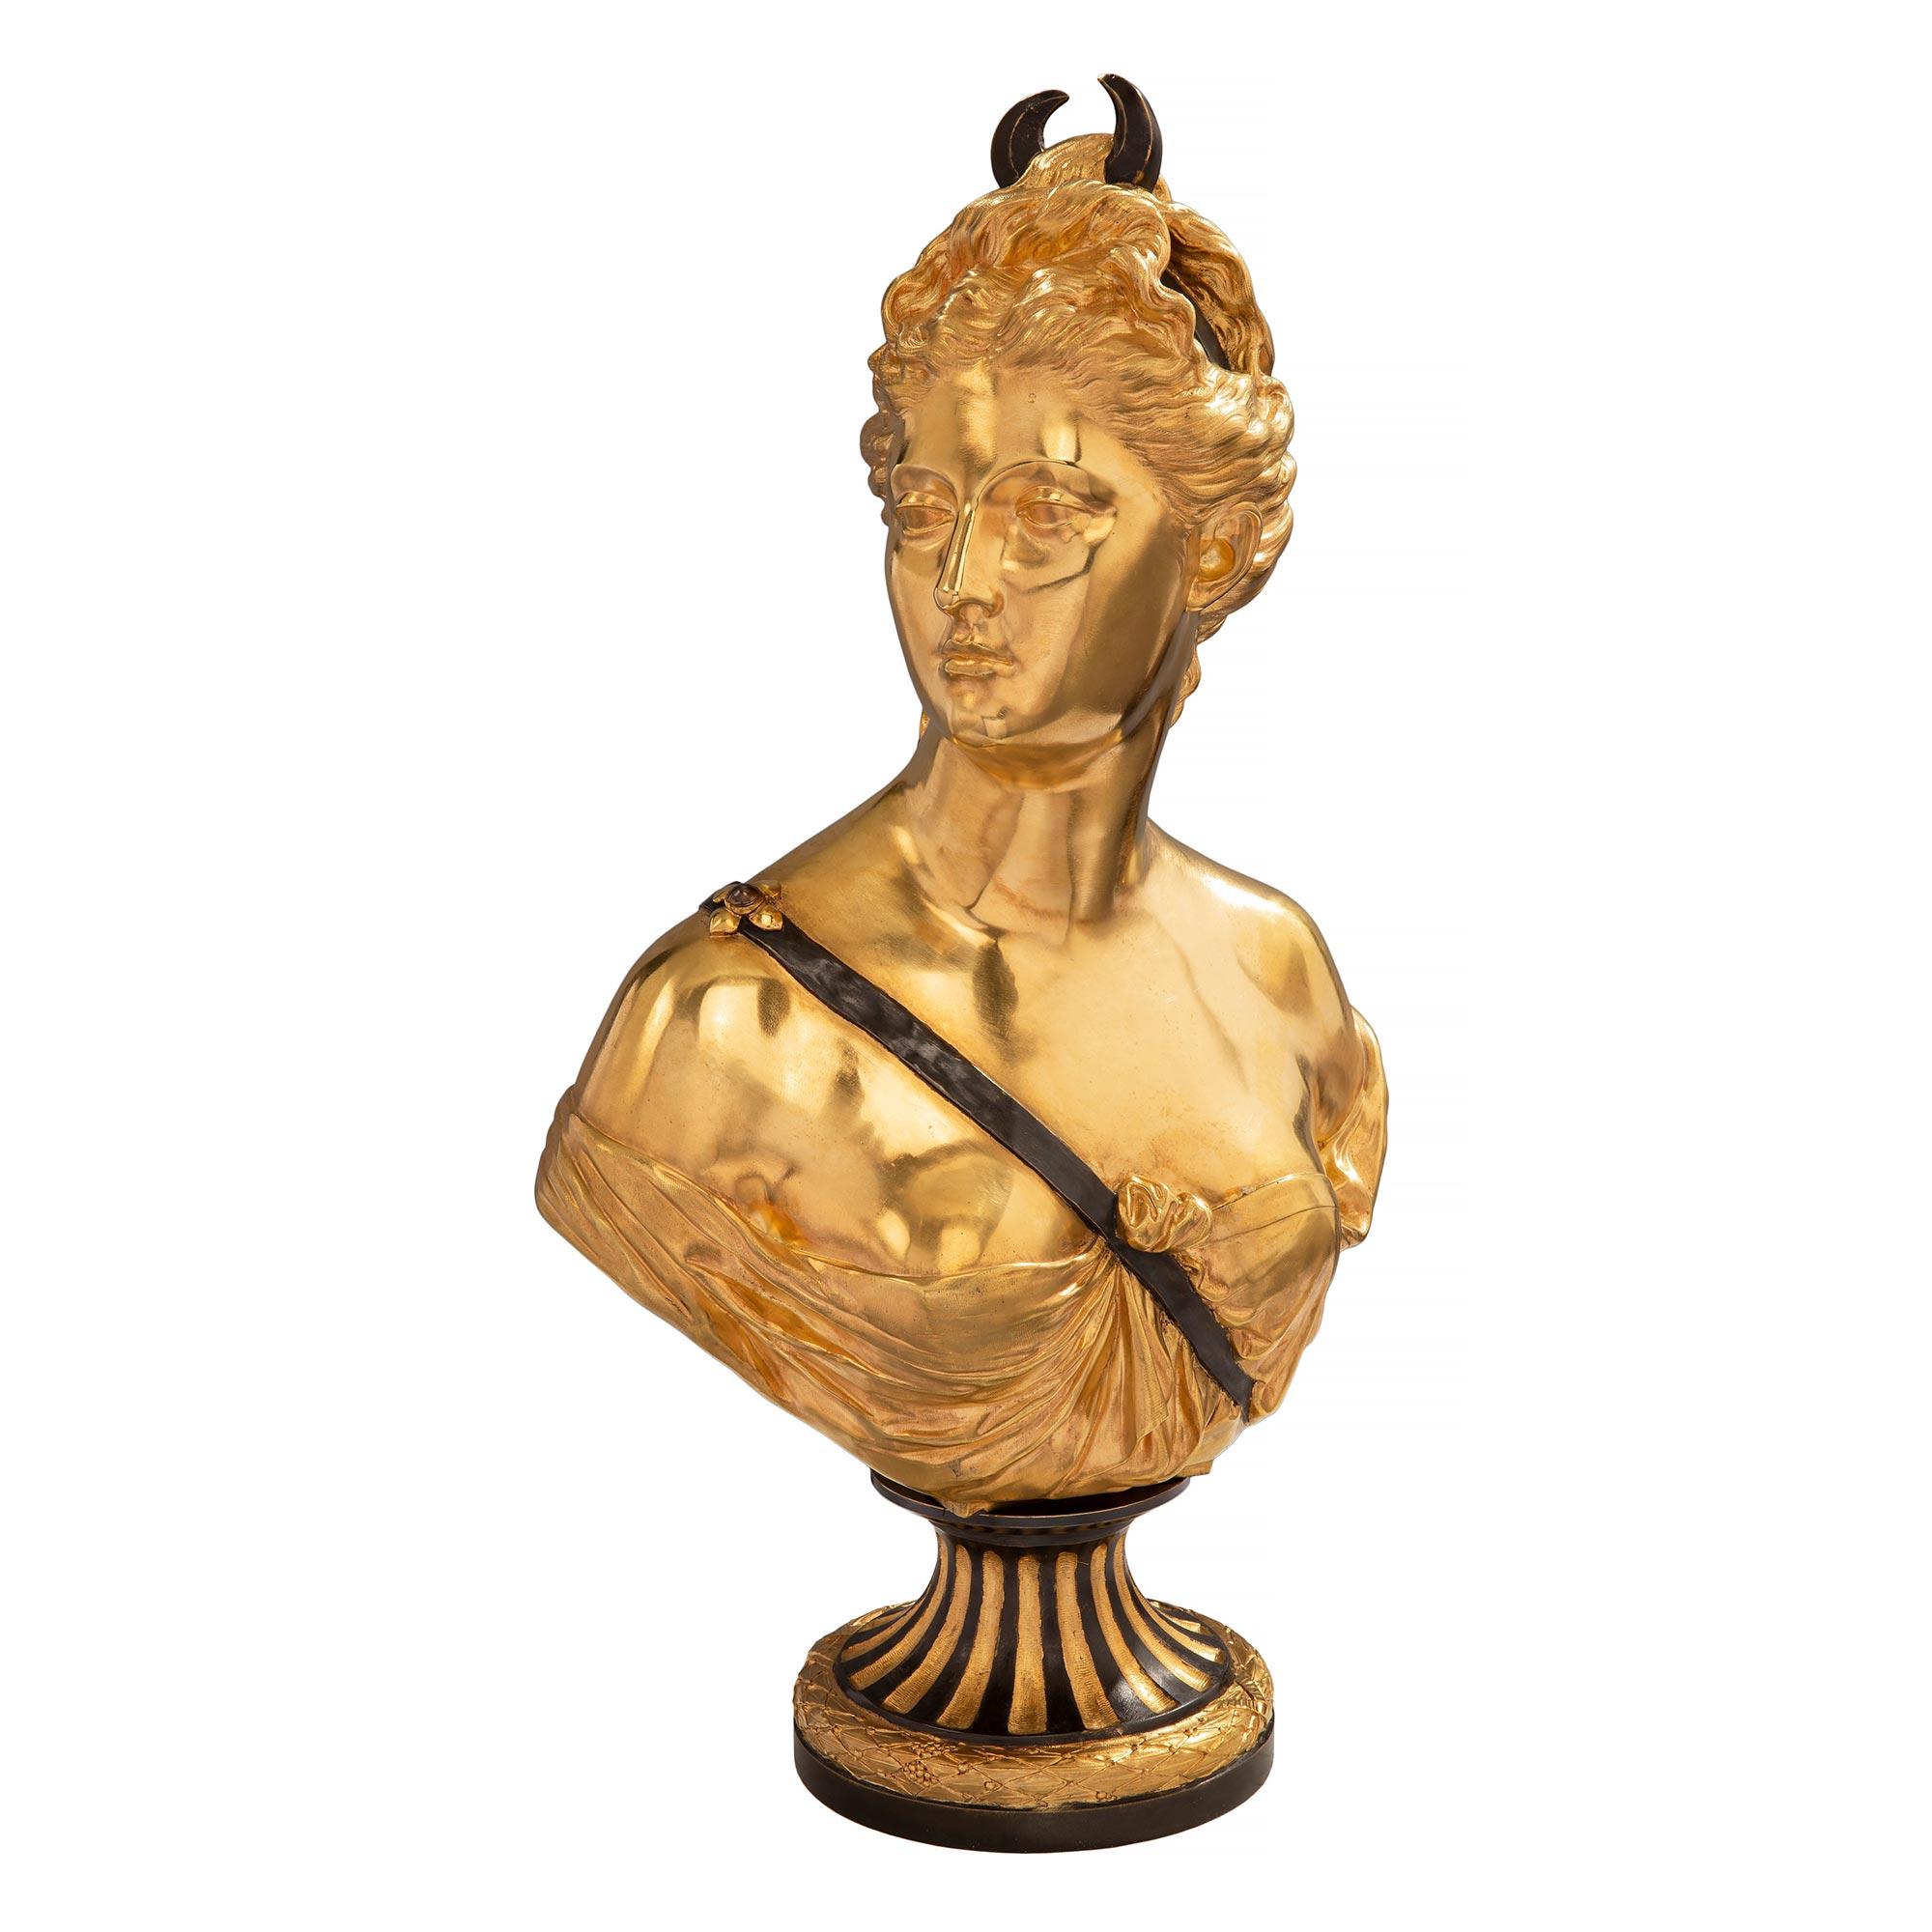 A striking French 19th century Louis XVI st. ormolu and patinated bronze bust of Diana the Huntress, signed Houdon and Susse Frères. The bust is raised by a striking circular base with a richly chased wrap around berried laurel band and a patinated